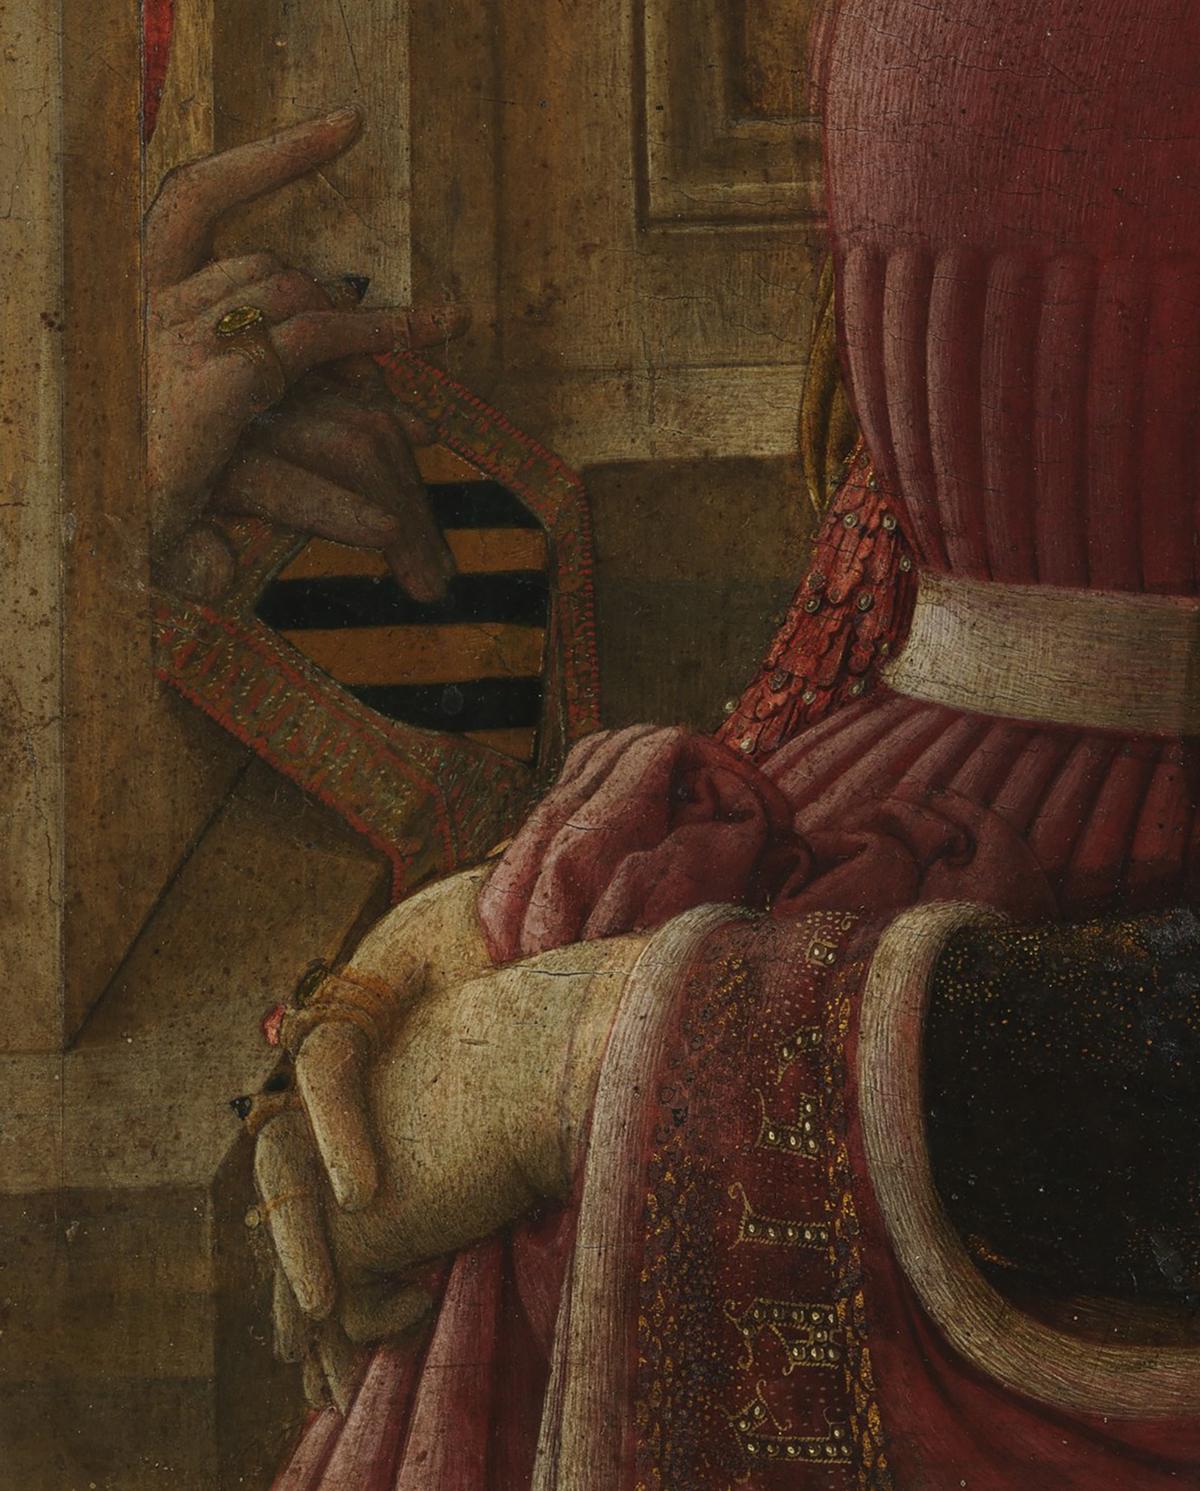 A detail of sitter's hands and rings in "Portrait of a Woman With a Man at a Casement," circa 1440, by Fra Filippo Lippi. (Public Domain)